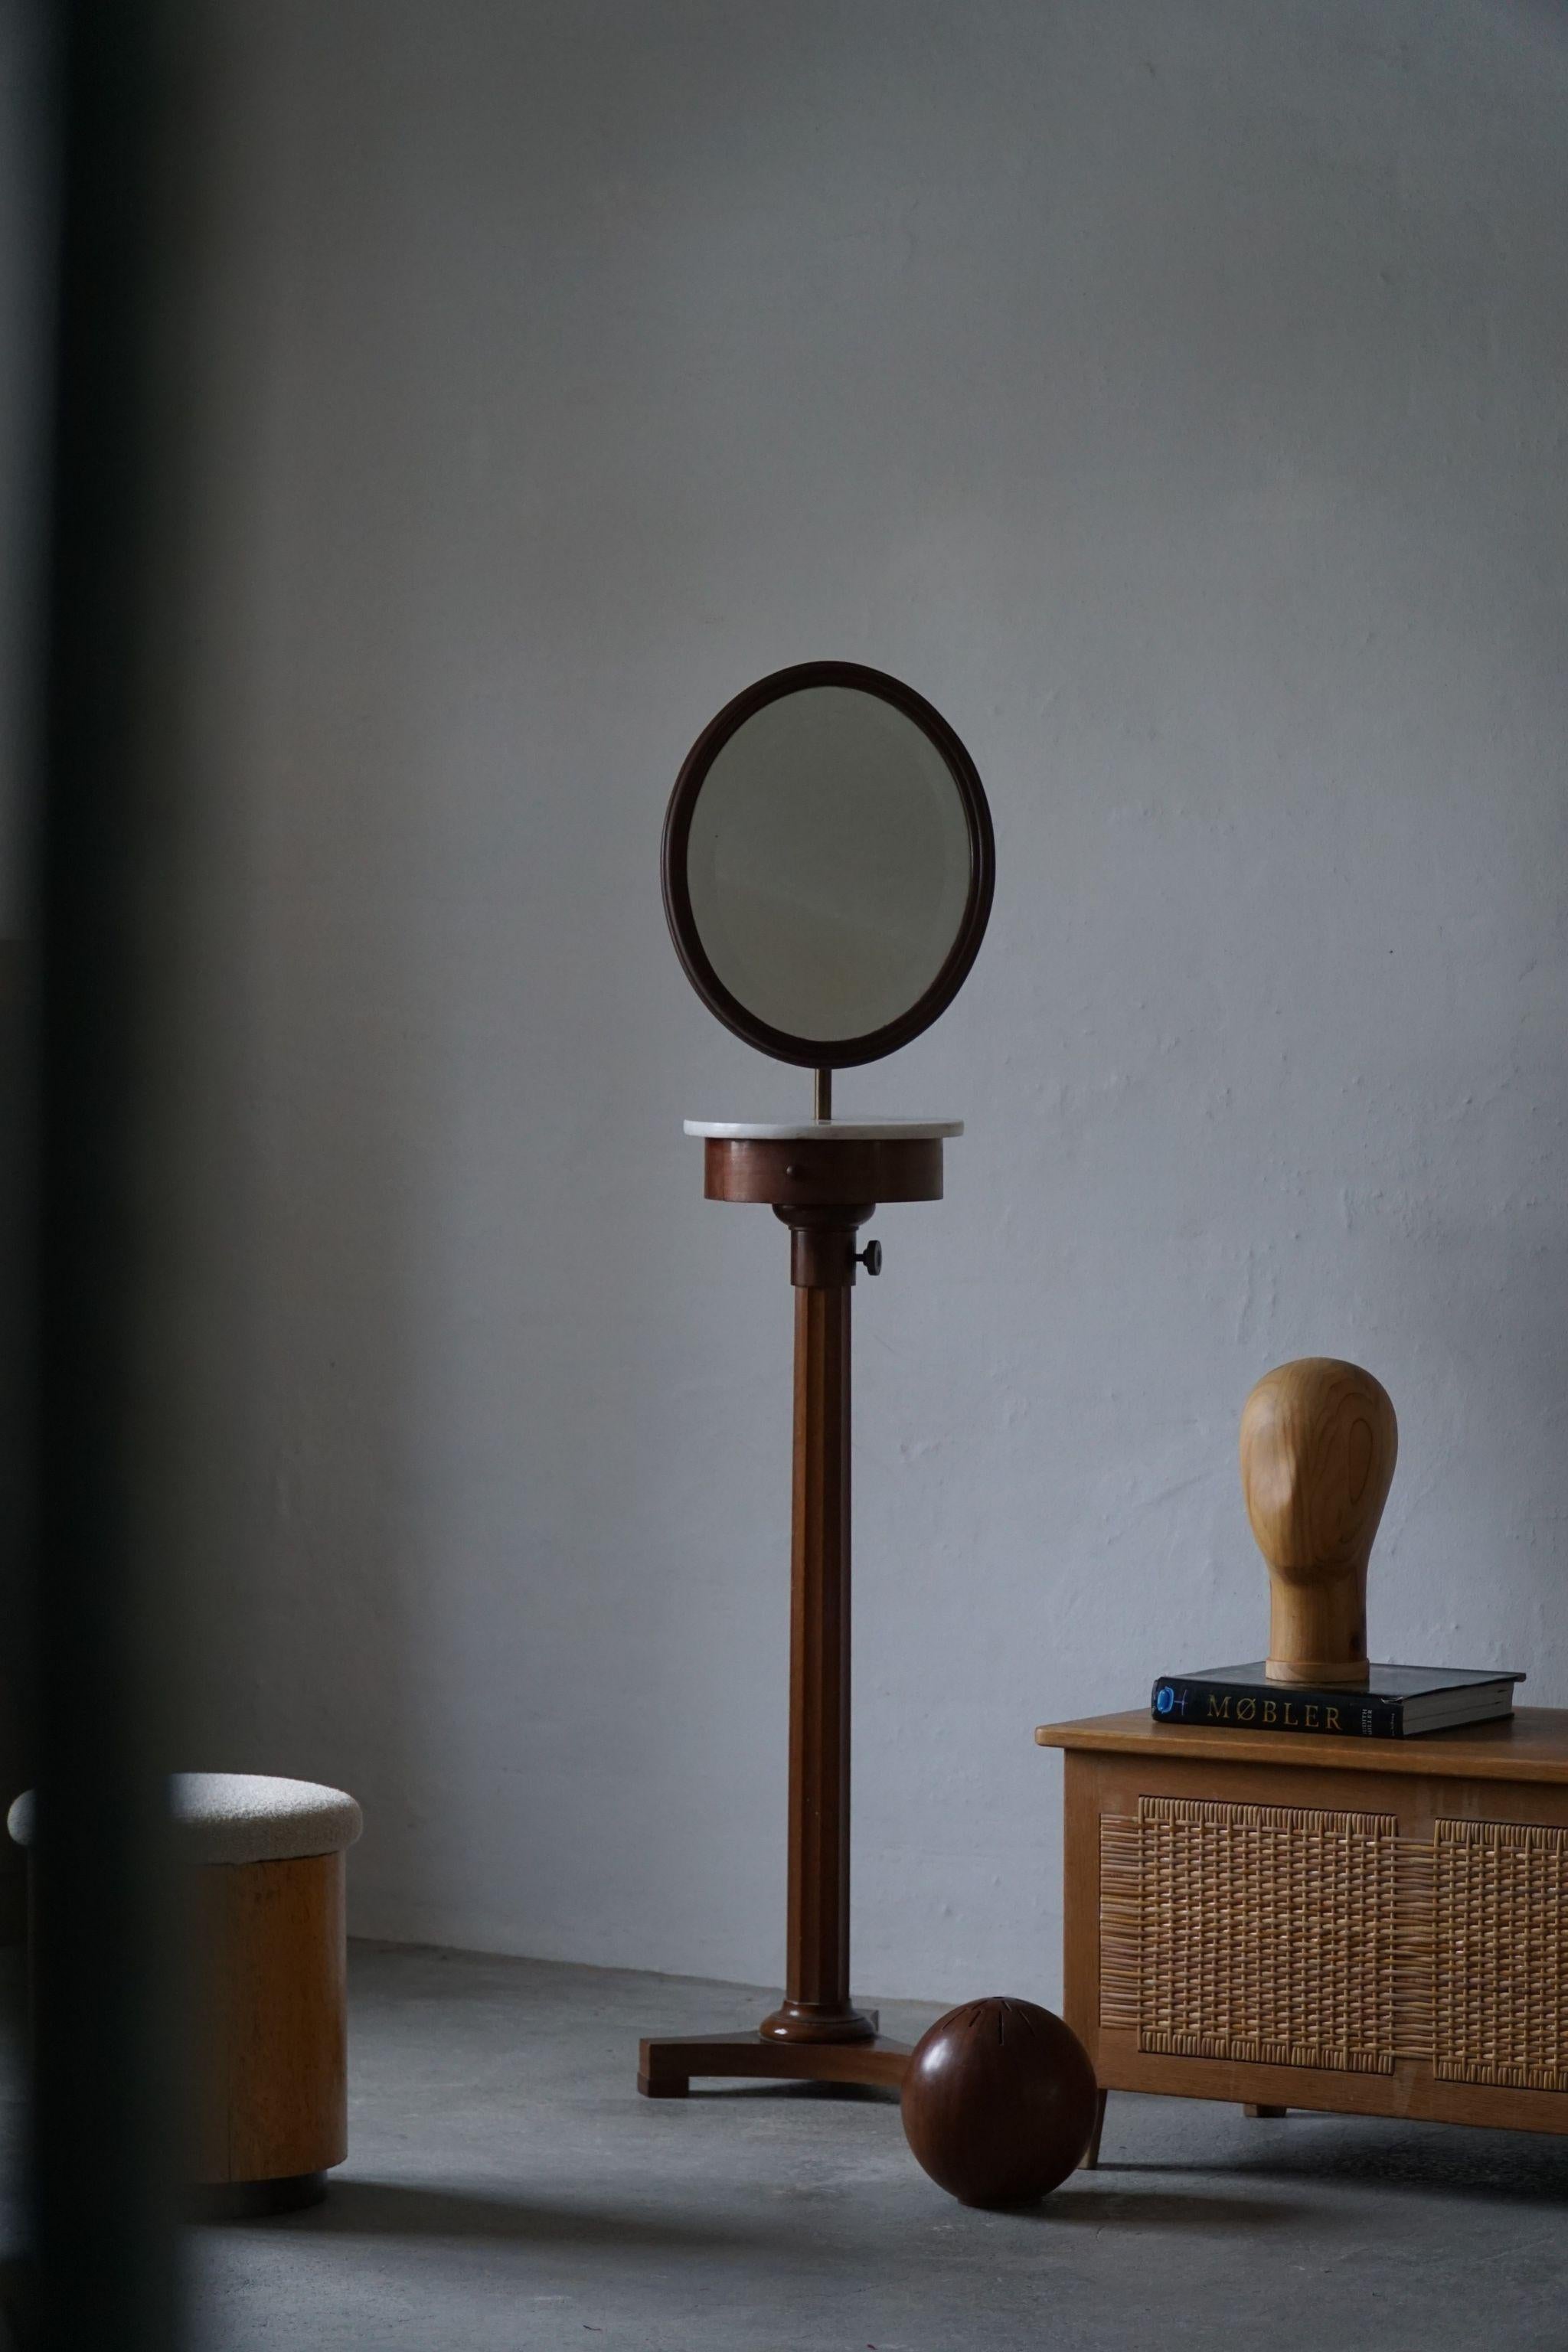 A decadent freestanding Italian adjustable oval mirror. Made in walnut, with a marble top, underneath a small shelf. Such beautiful details and great craftmanship, made in the late Empire style. 

Measures: Full lenght 185 cm
Min. lenght 160 cm.